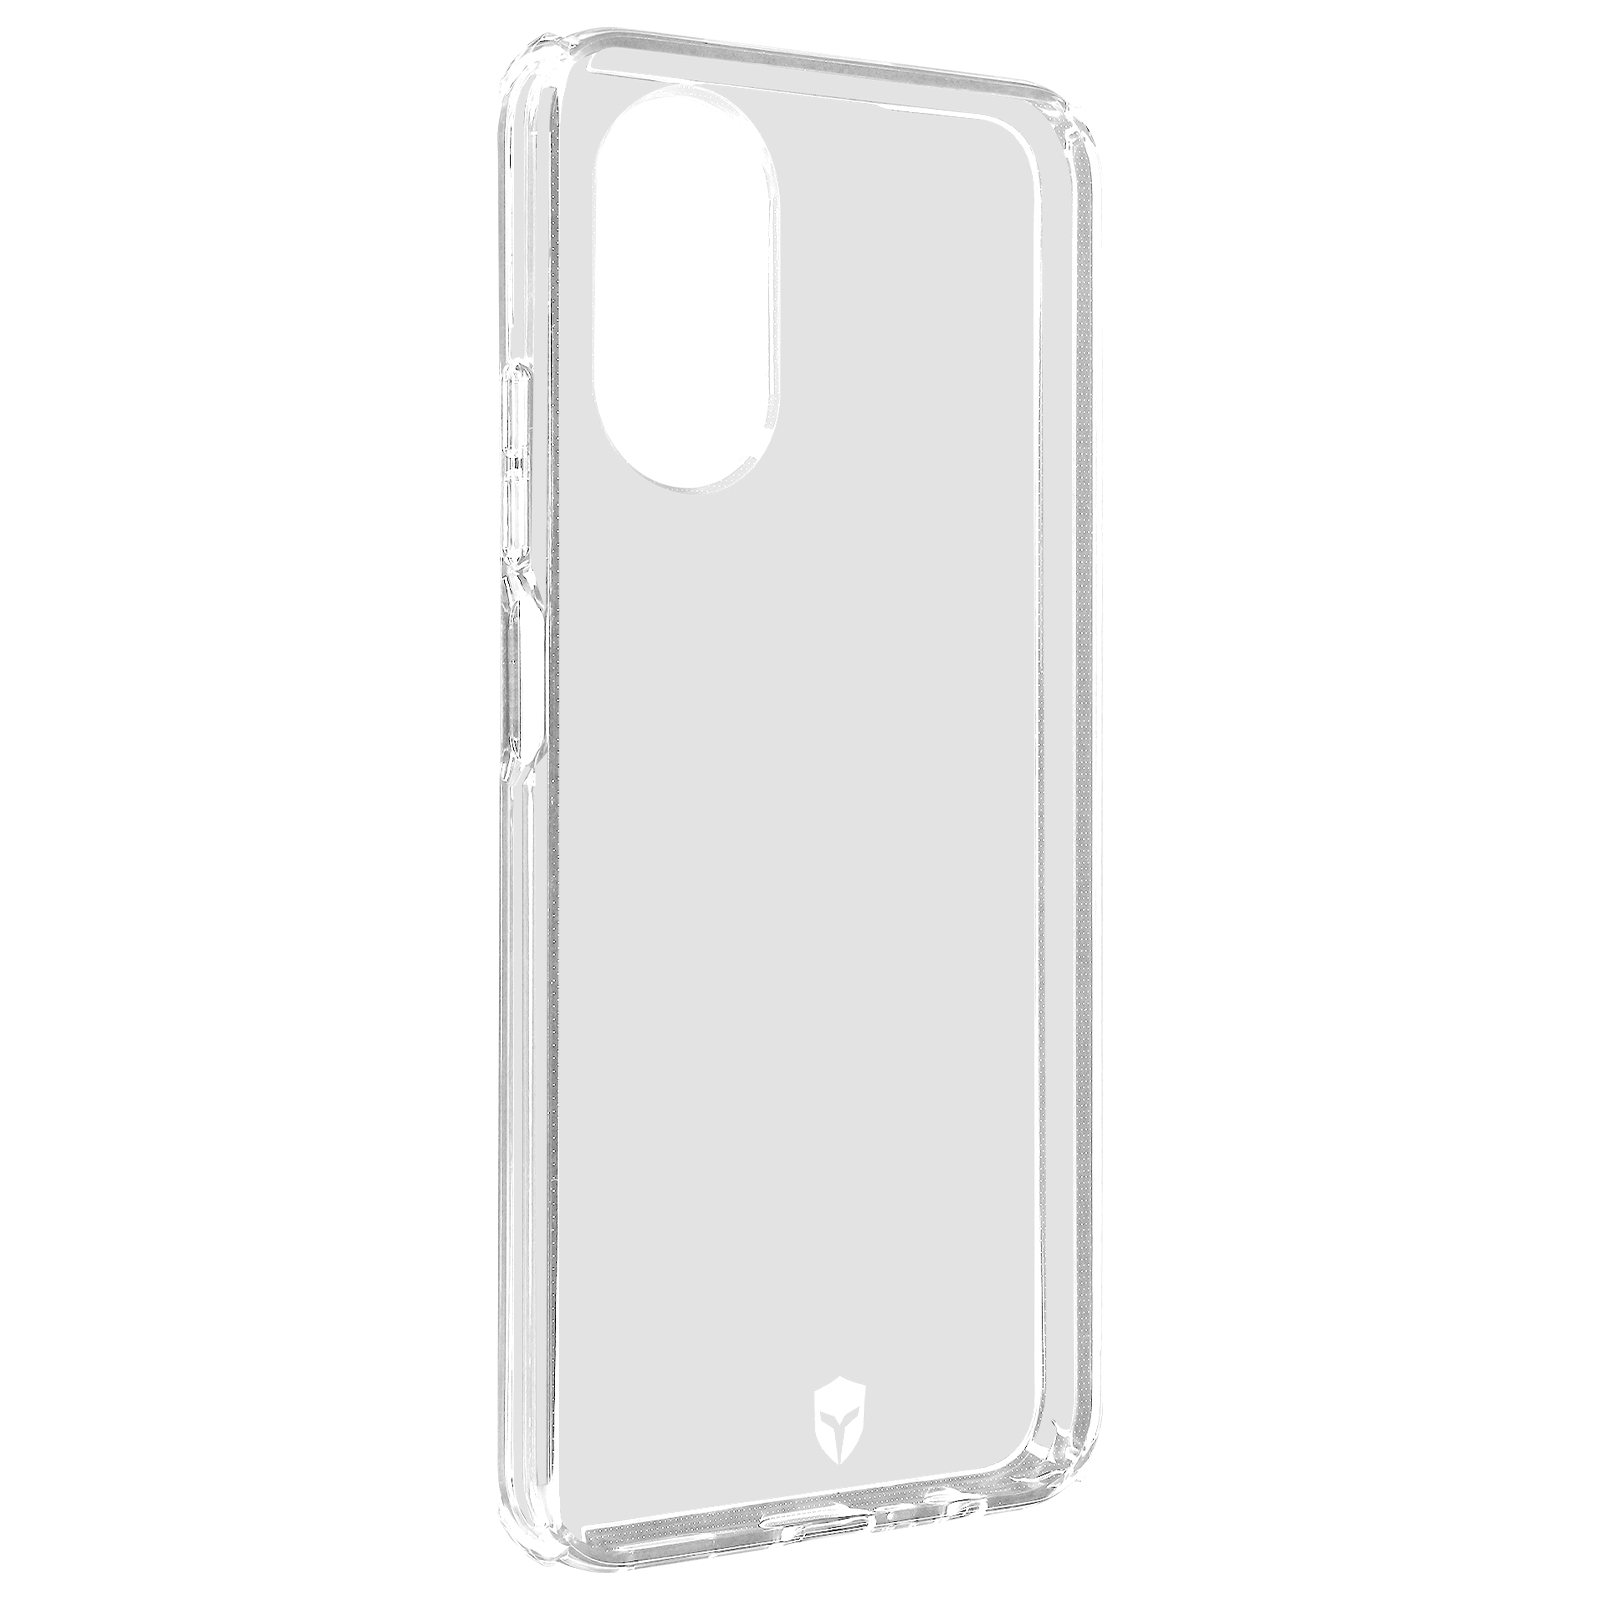 FORCE CASE Feel Series, Oppo Transparent Backcover, Oppo, A17